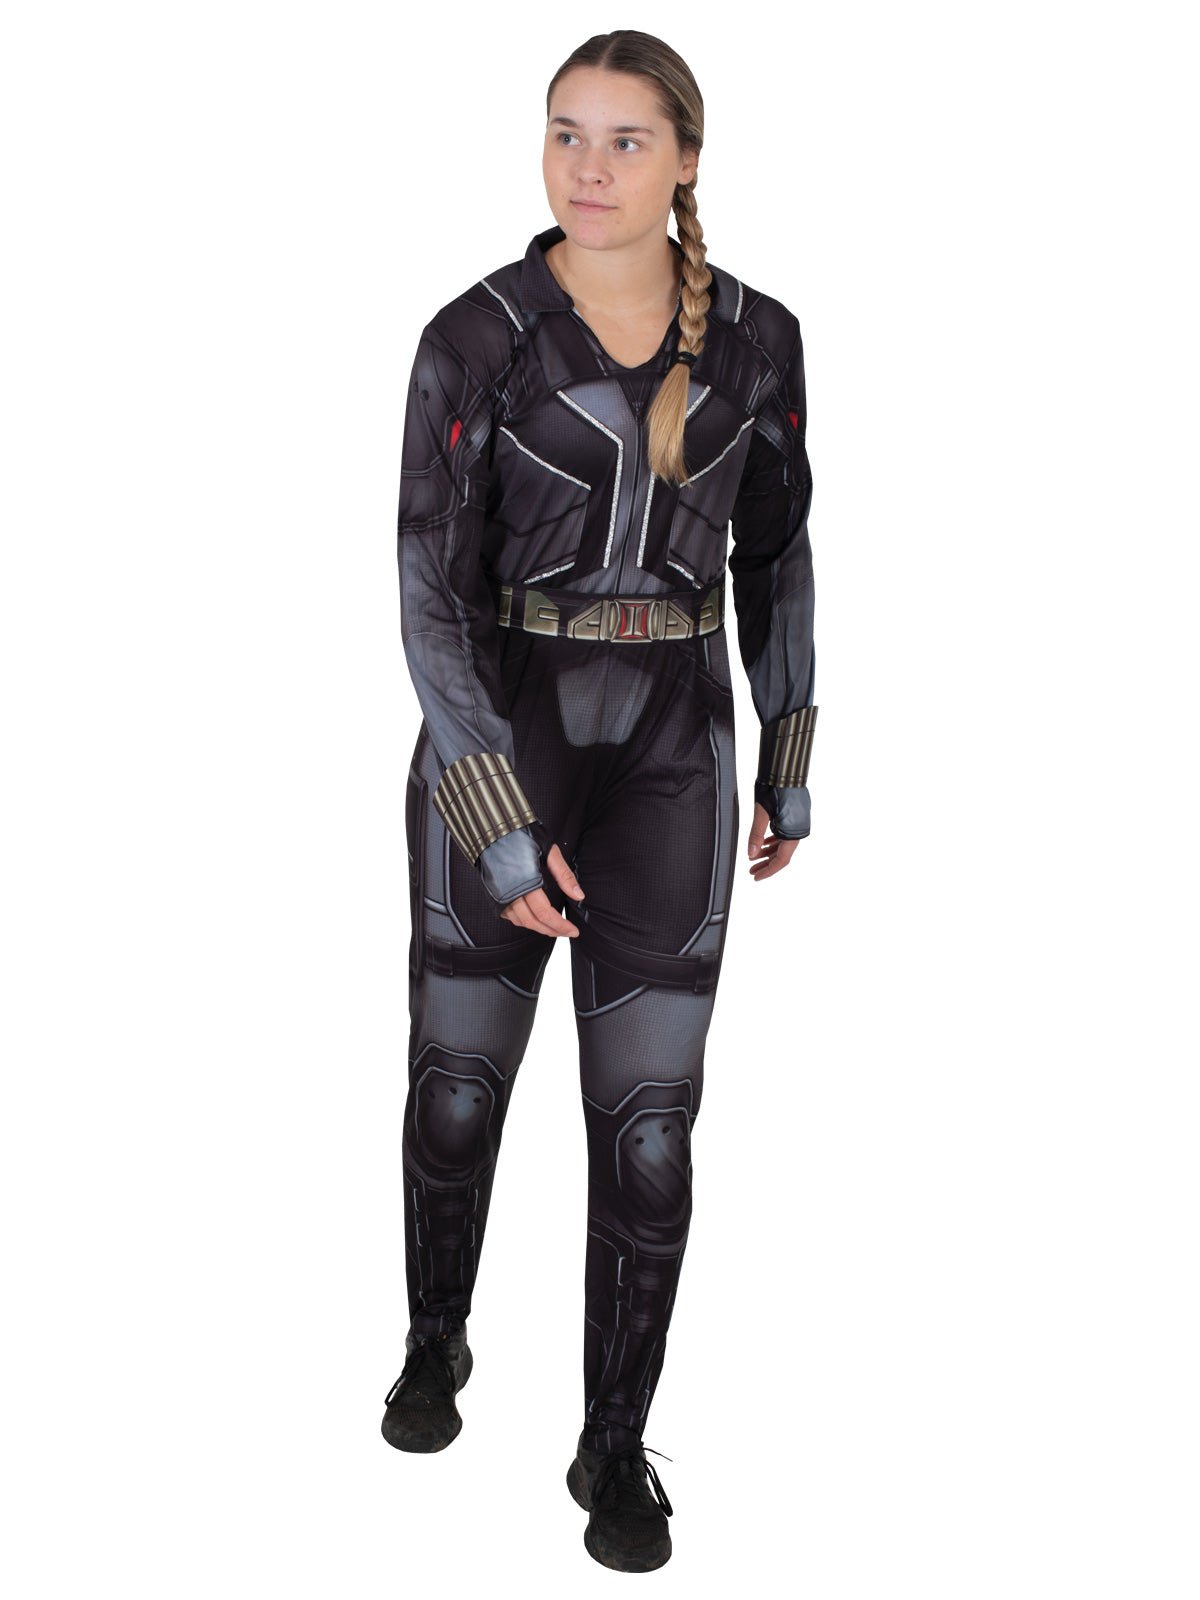 Adult Black Widow Spy Deluxe Outfit